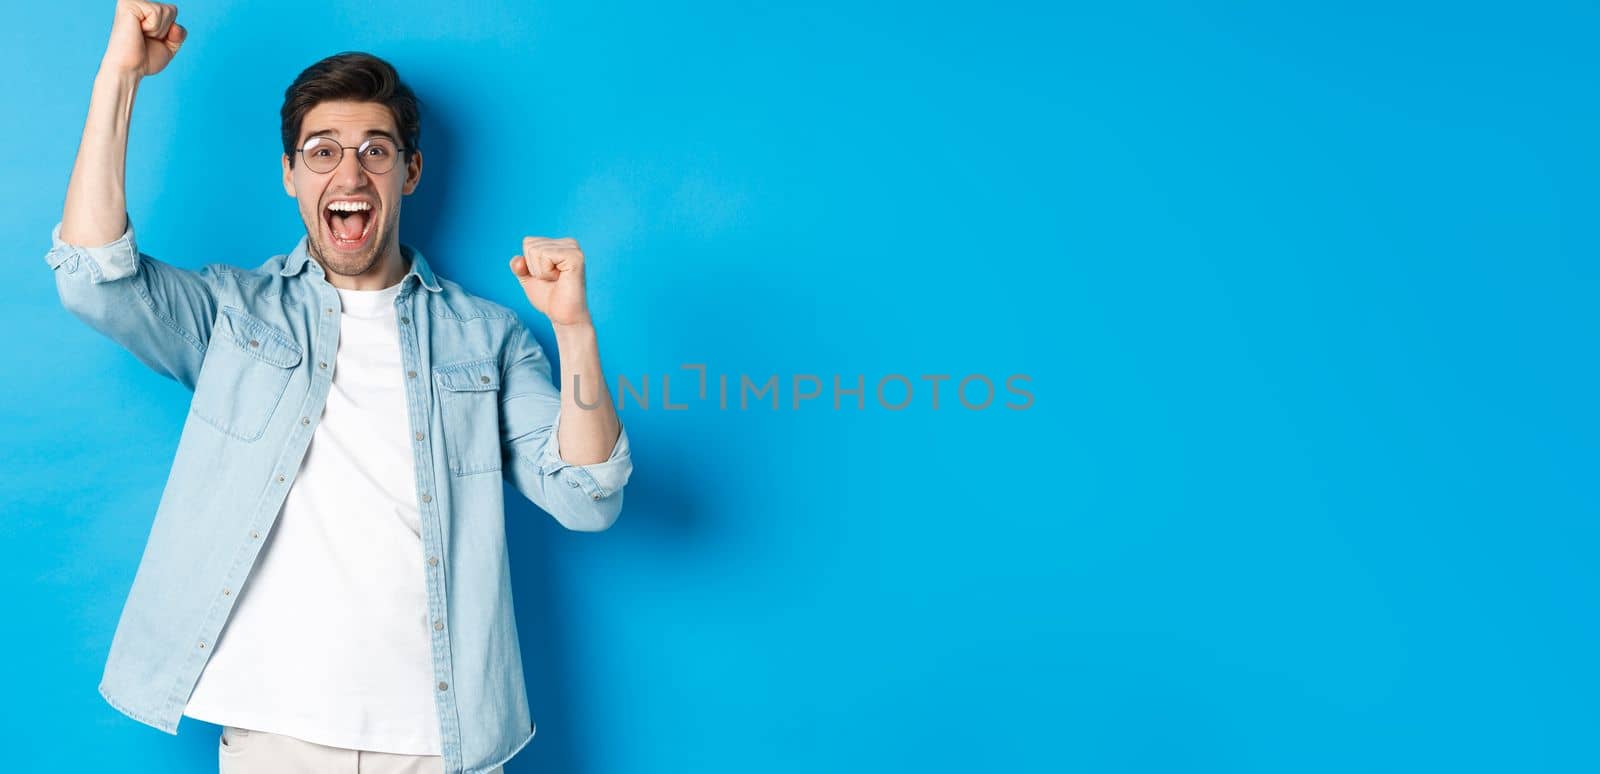 Excited handsome man triumphing, raising hands up and shouting for joy, celebrating victory, standing against blue background.